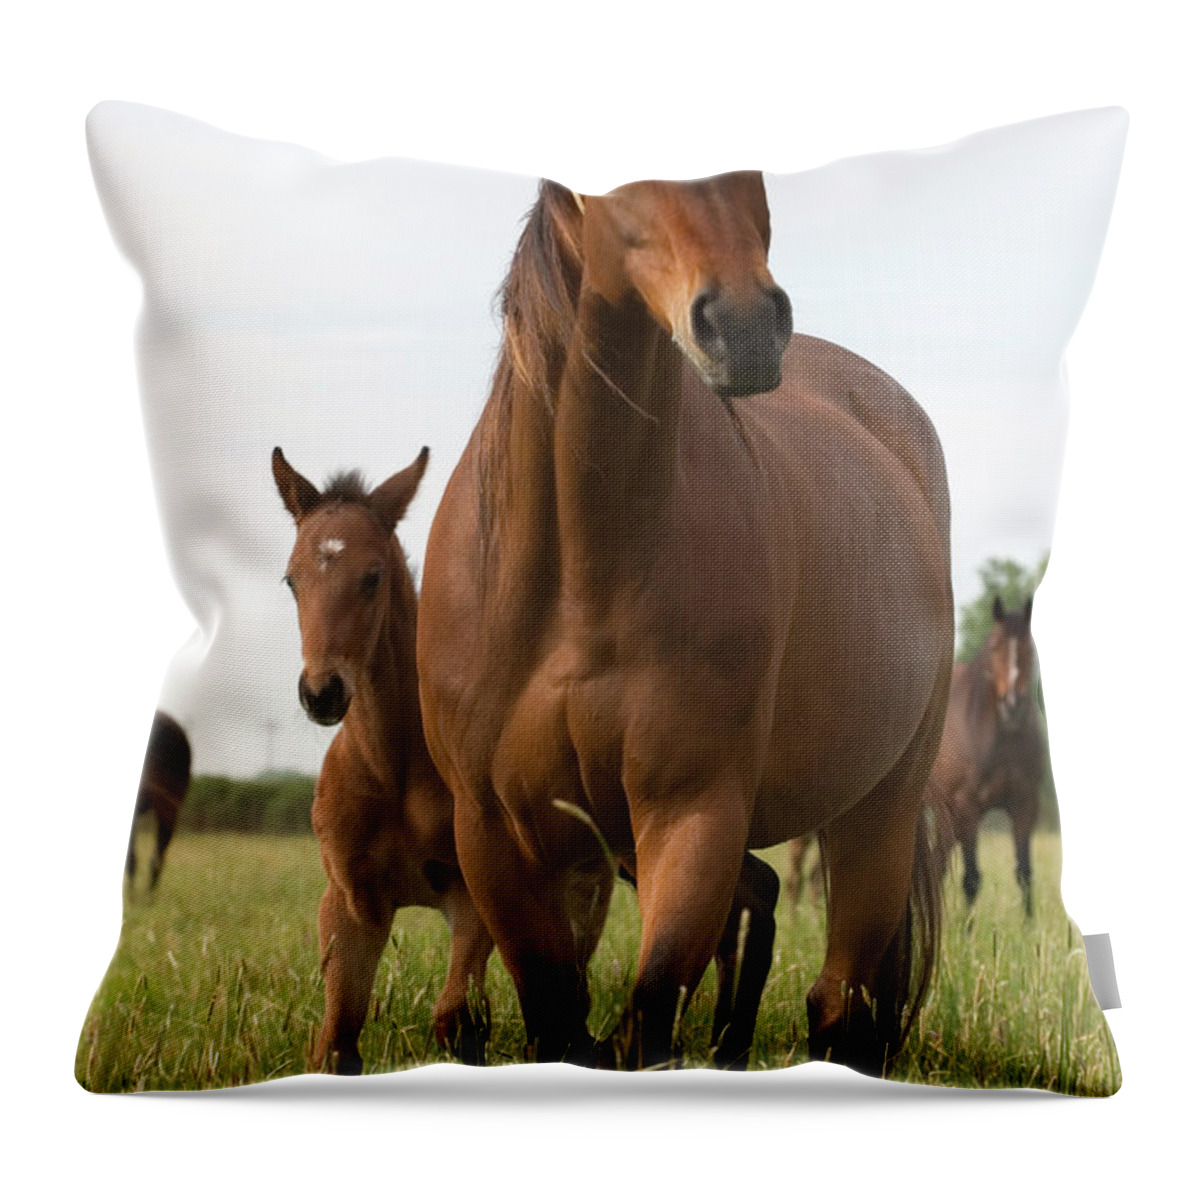 Horse Throw Pillow featuring the photograph Chestnut Thoroughbred Mare And Foal by Lesliejmorris